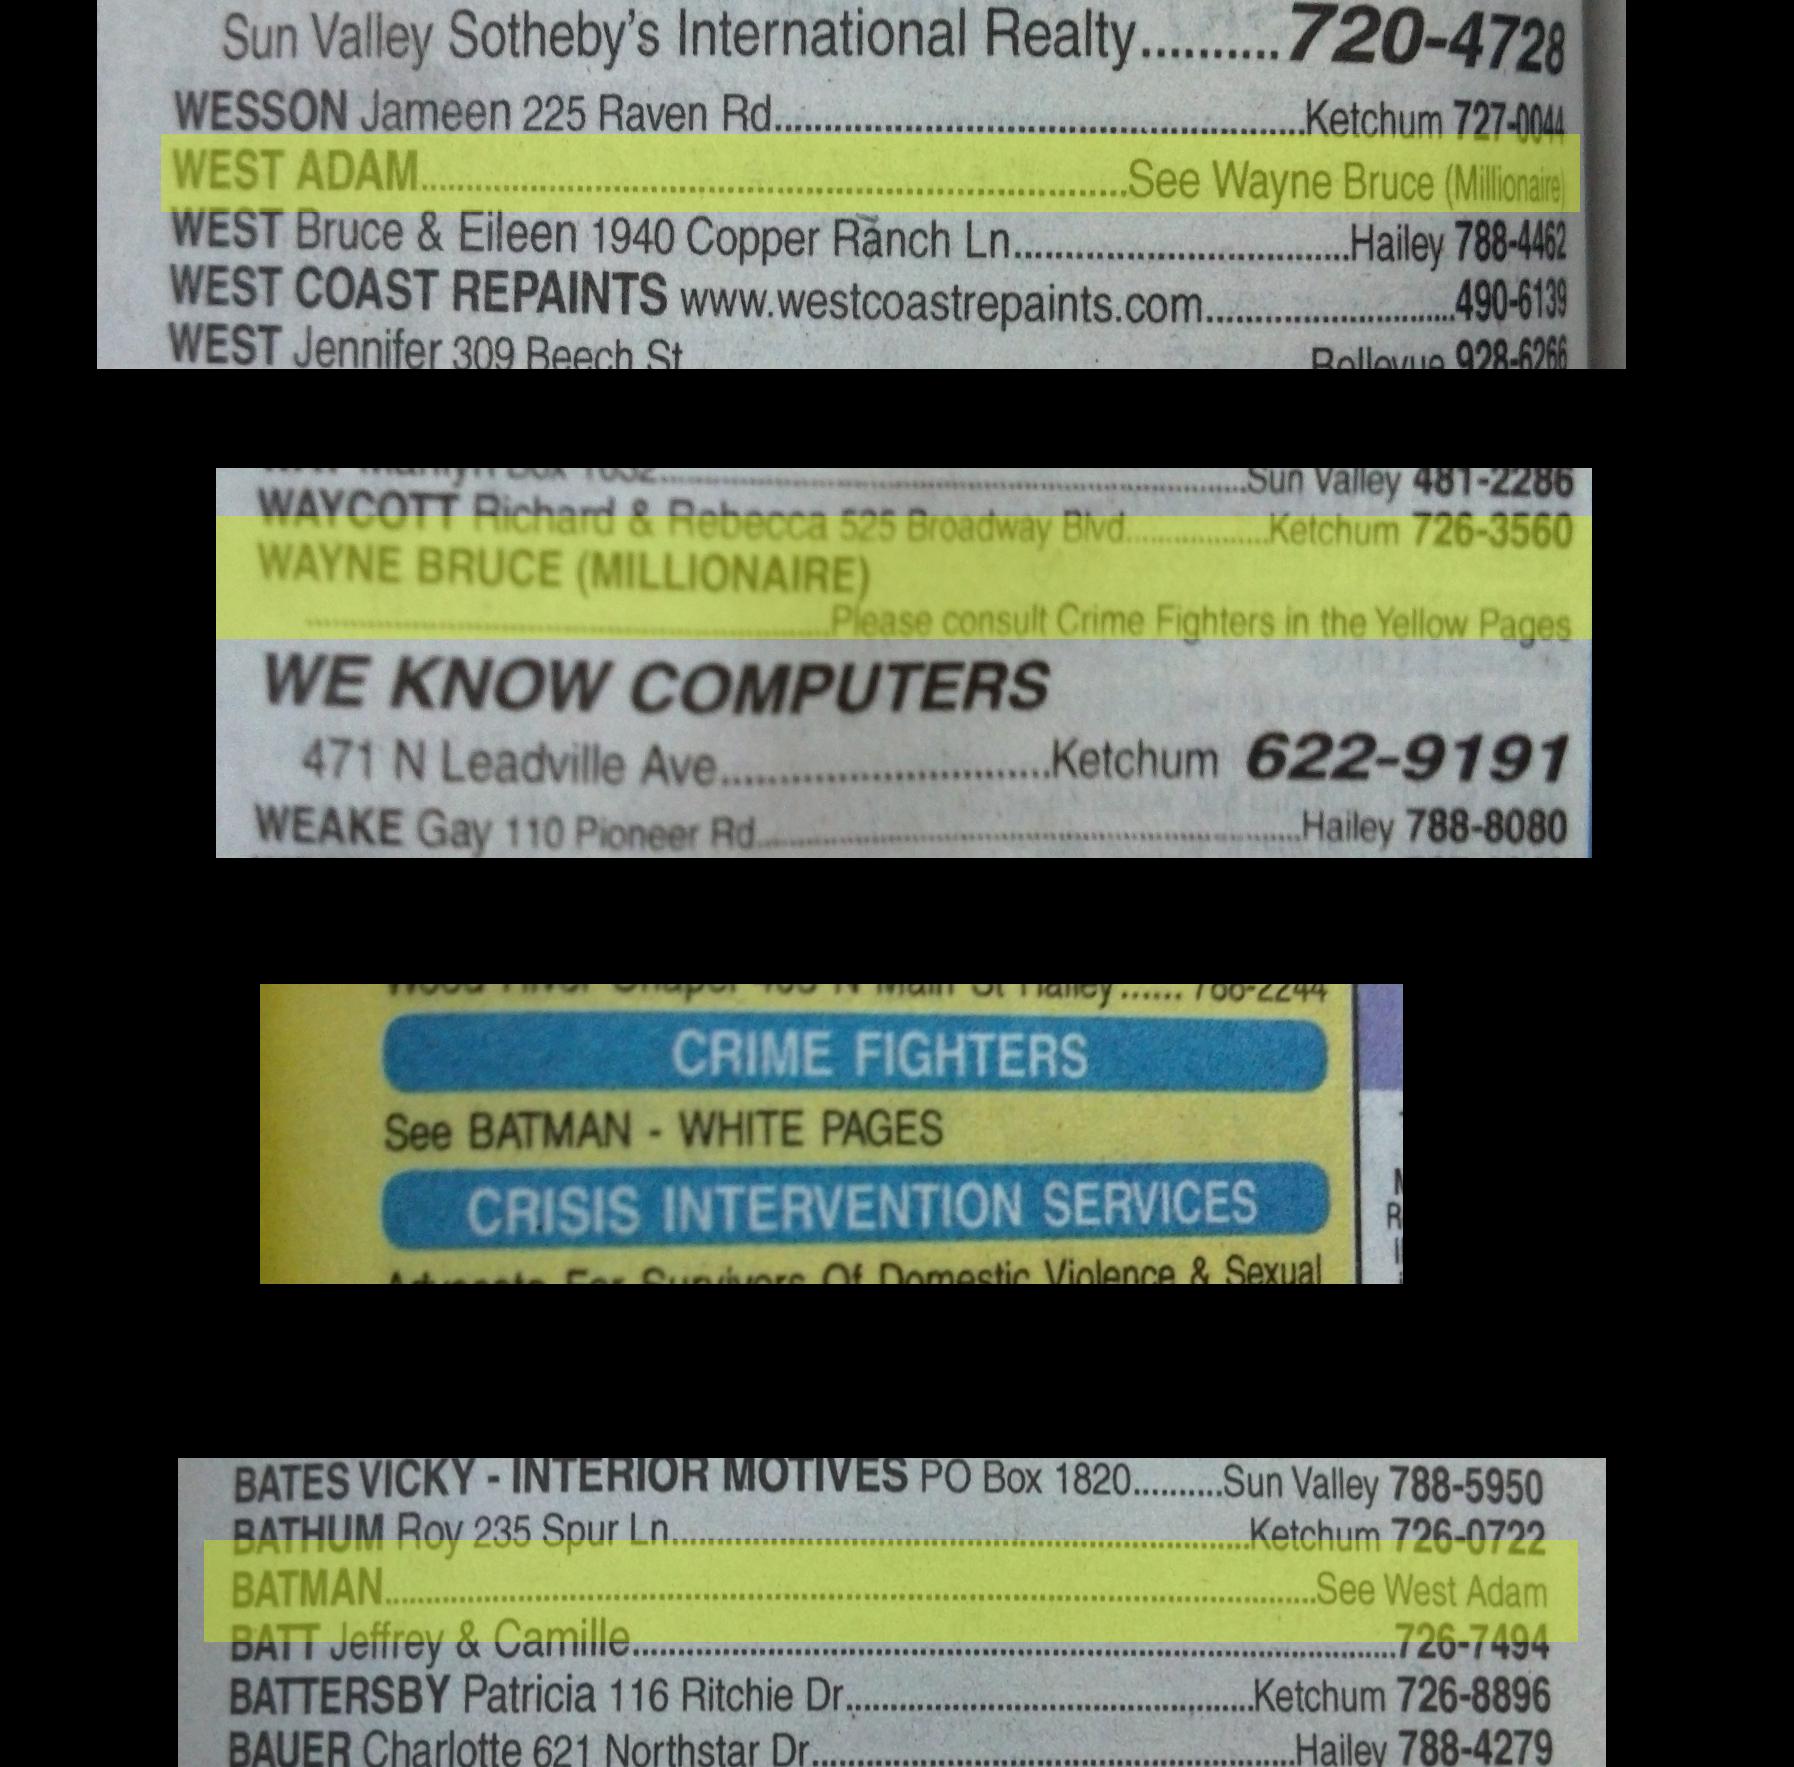 I live in the same valley as Adam West. I decided to look him up in the phone book today.